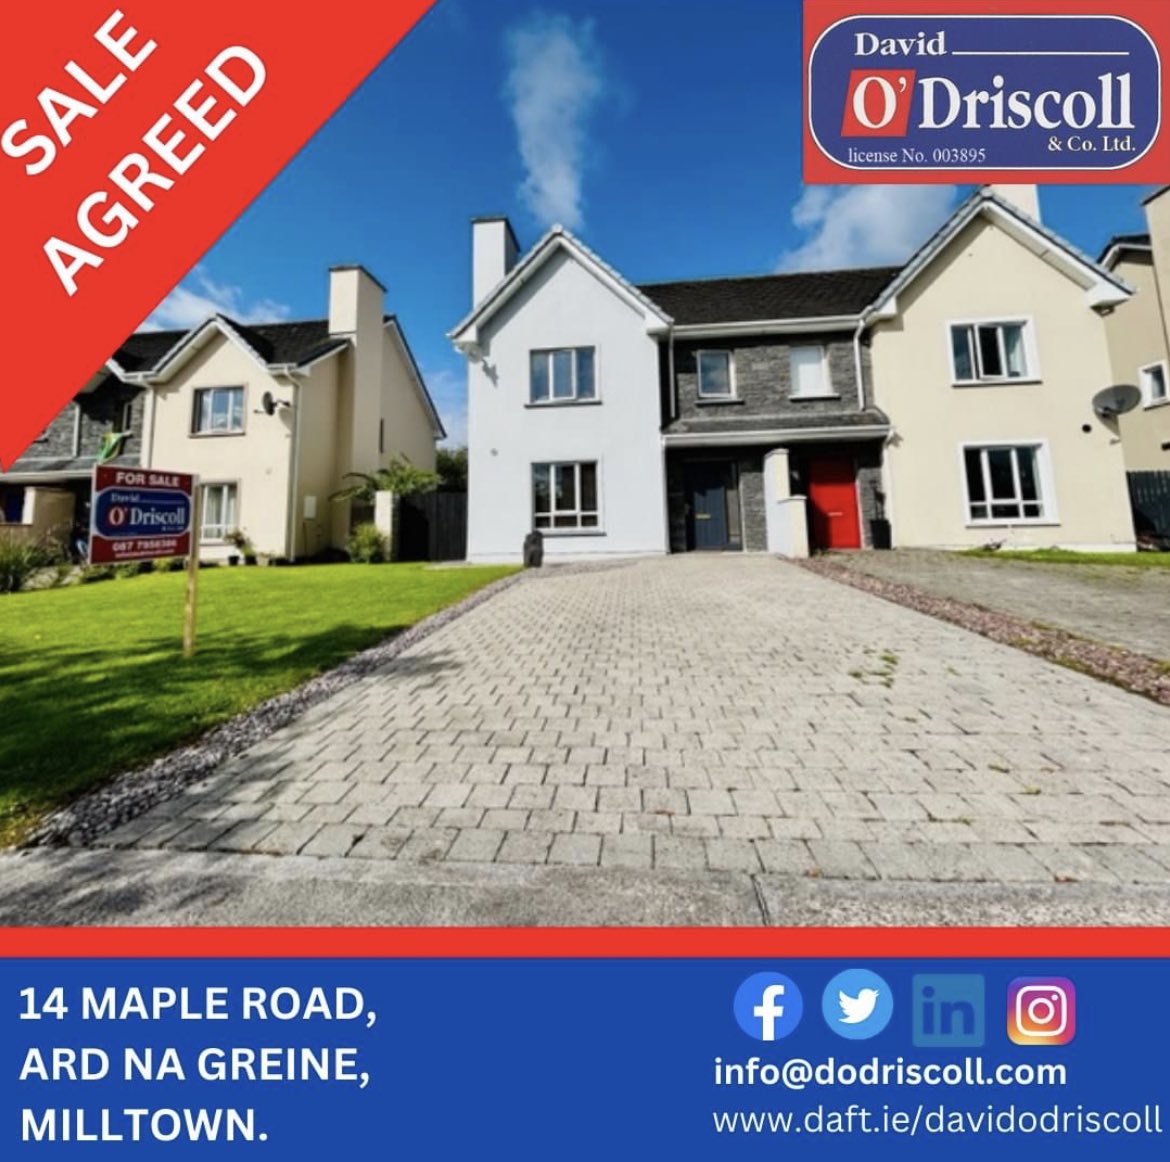 We have just agreed the sale of this beautiful 4 Bed Semi in #Milltown. #saleagreed 
If you have a property you want to sell, please call David on 087-7958386 or 
e-mail: info@dodriscoll.com